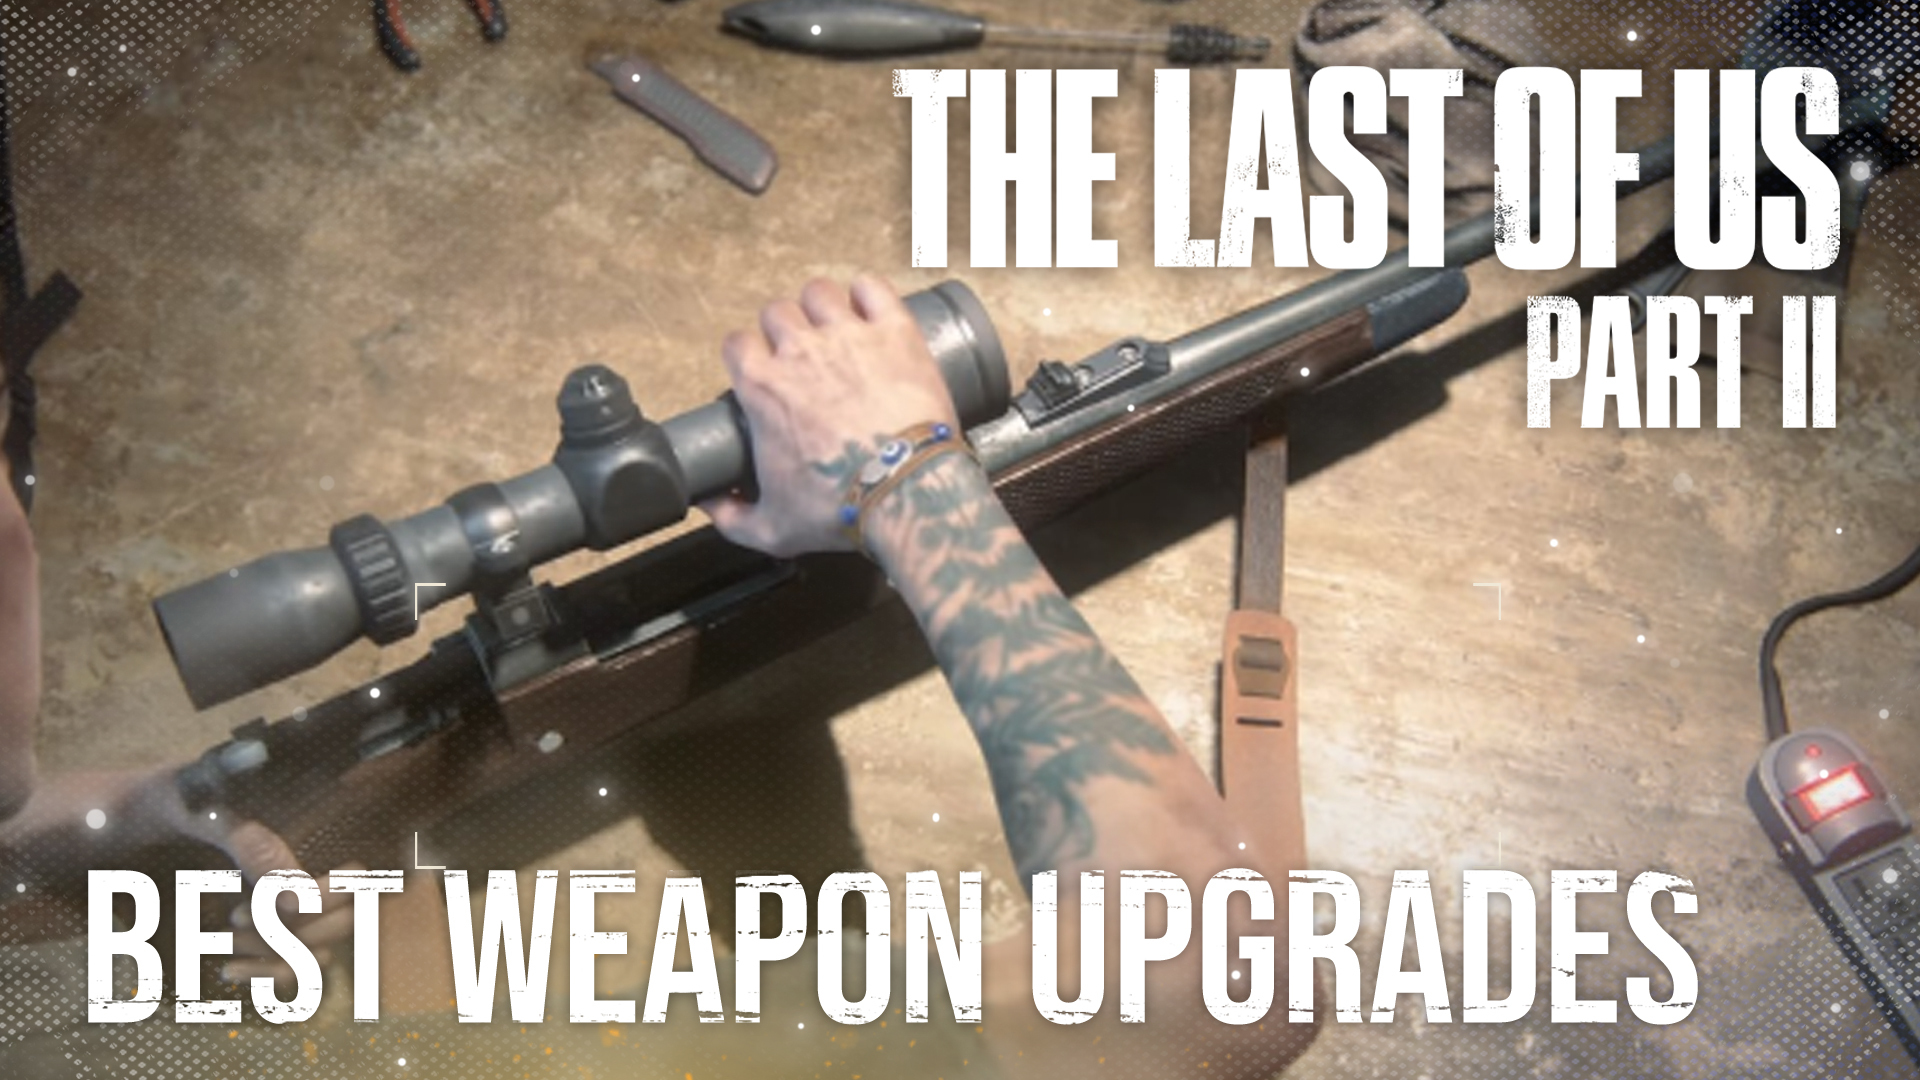 How to upgrade your weapons in The Last of Us Part II - Dexerto